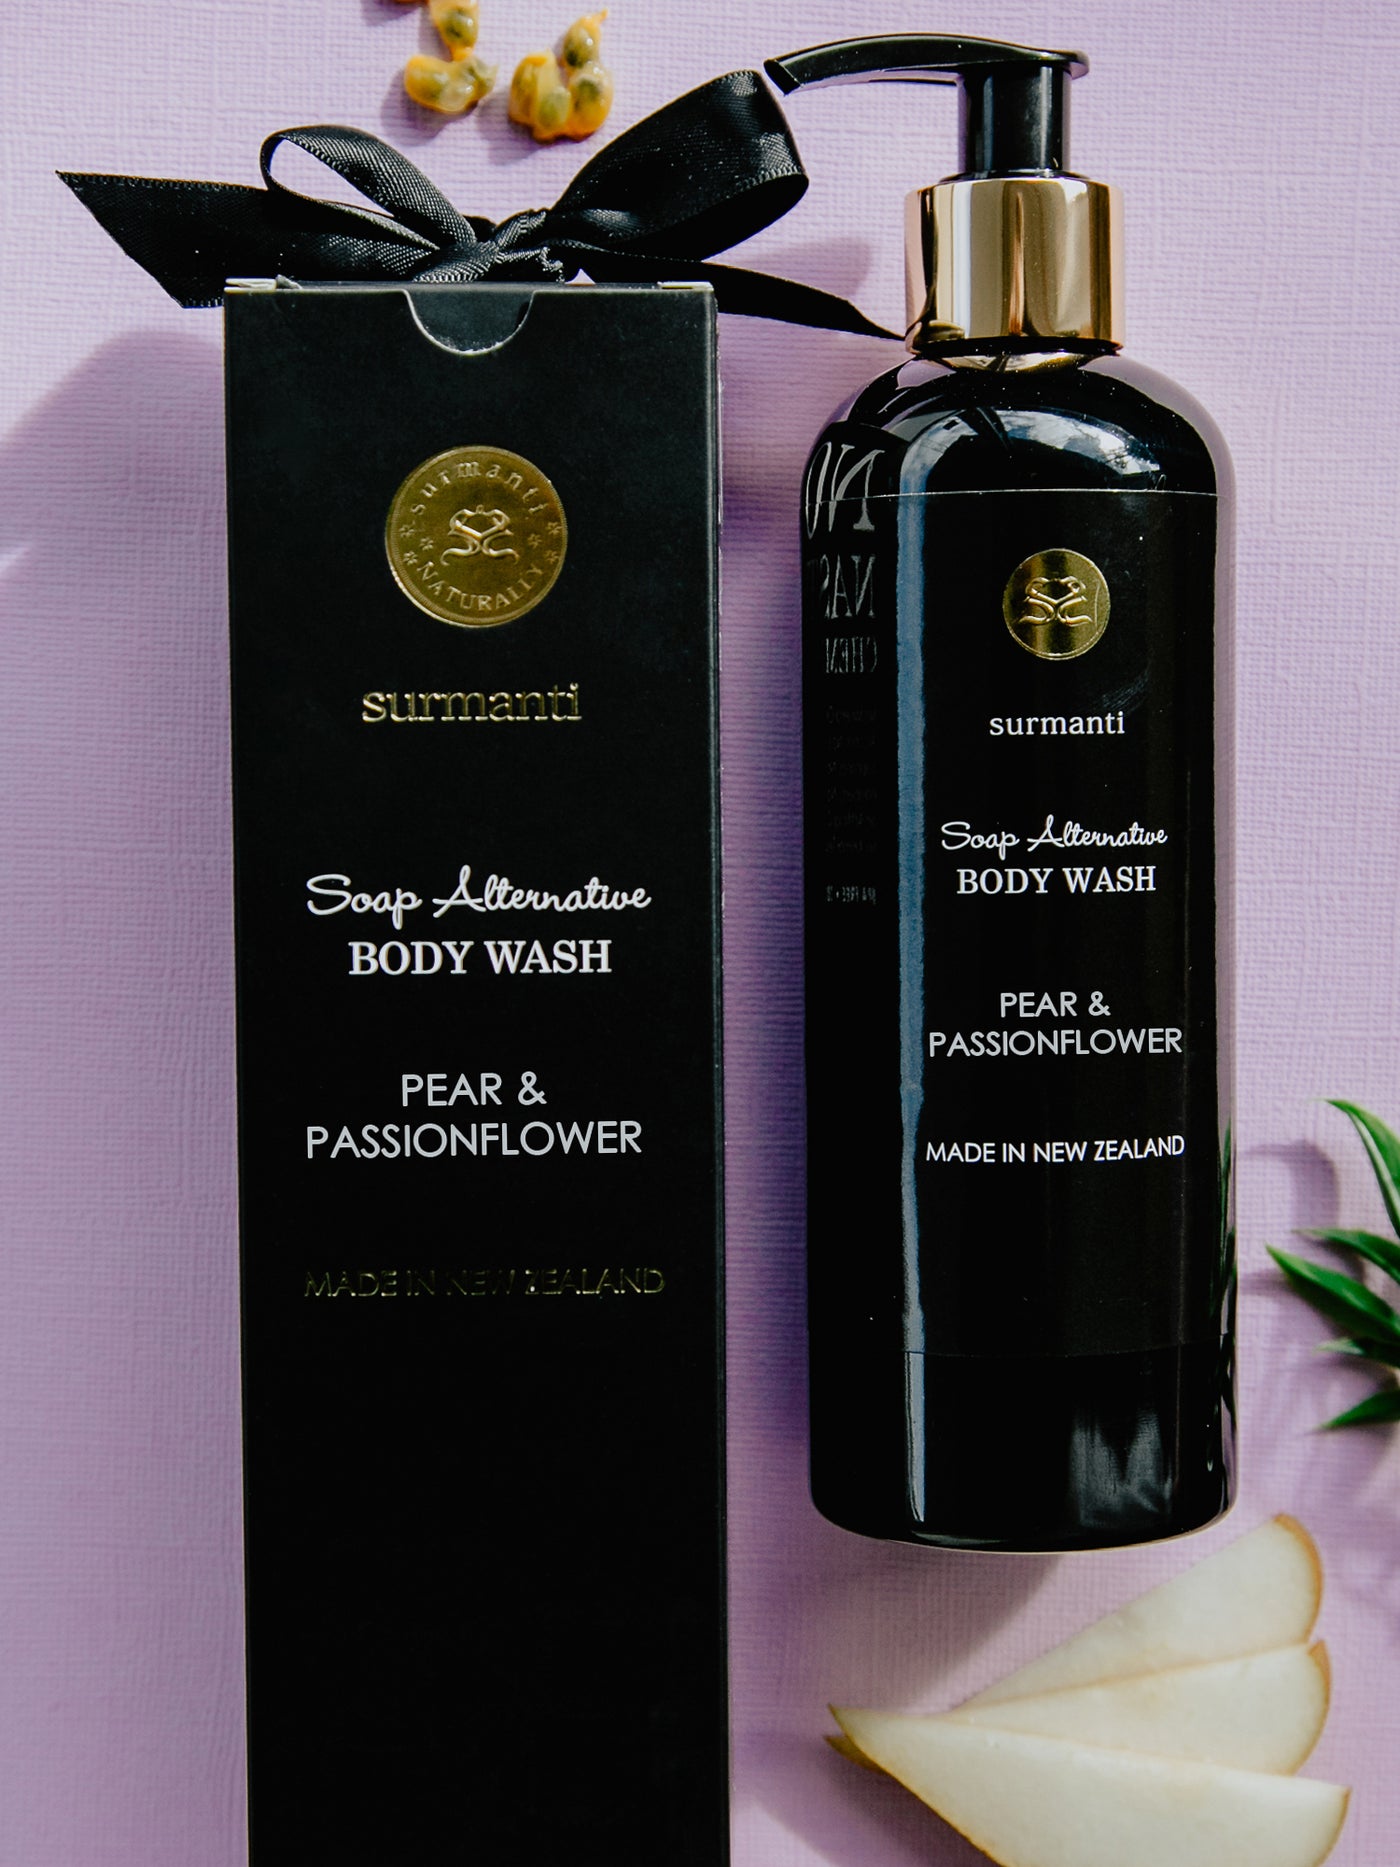 Pear & Passionflower Body Wash - Soap Alternative 300ml - Surmanti - Made In New Zealand